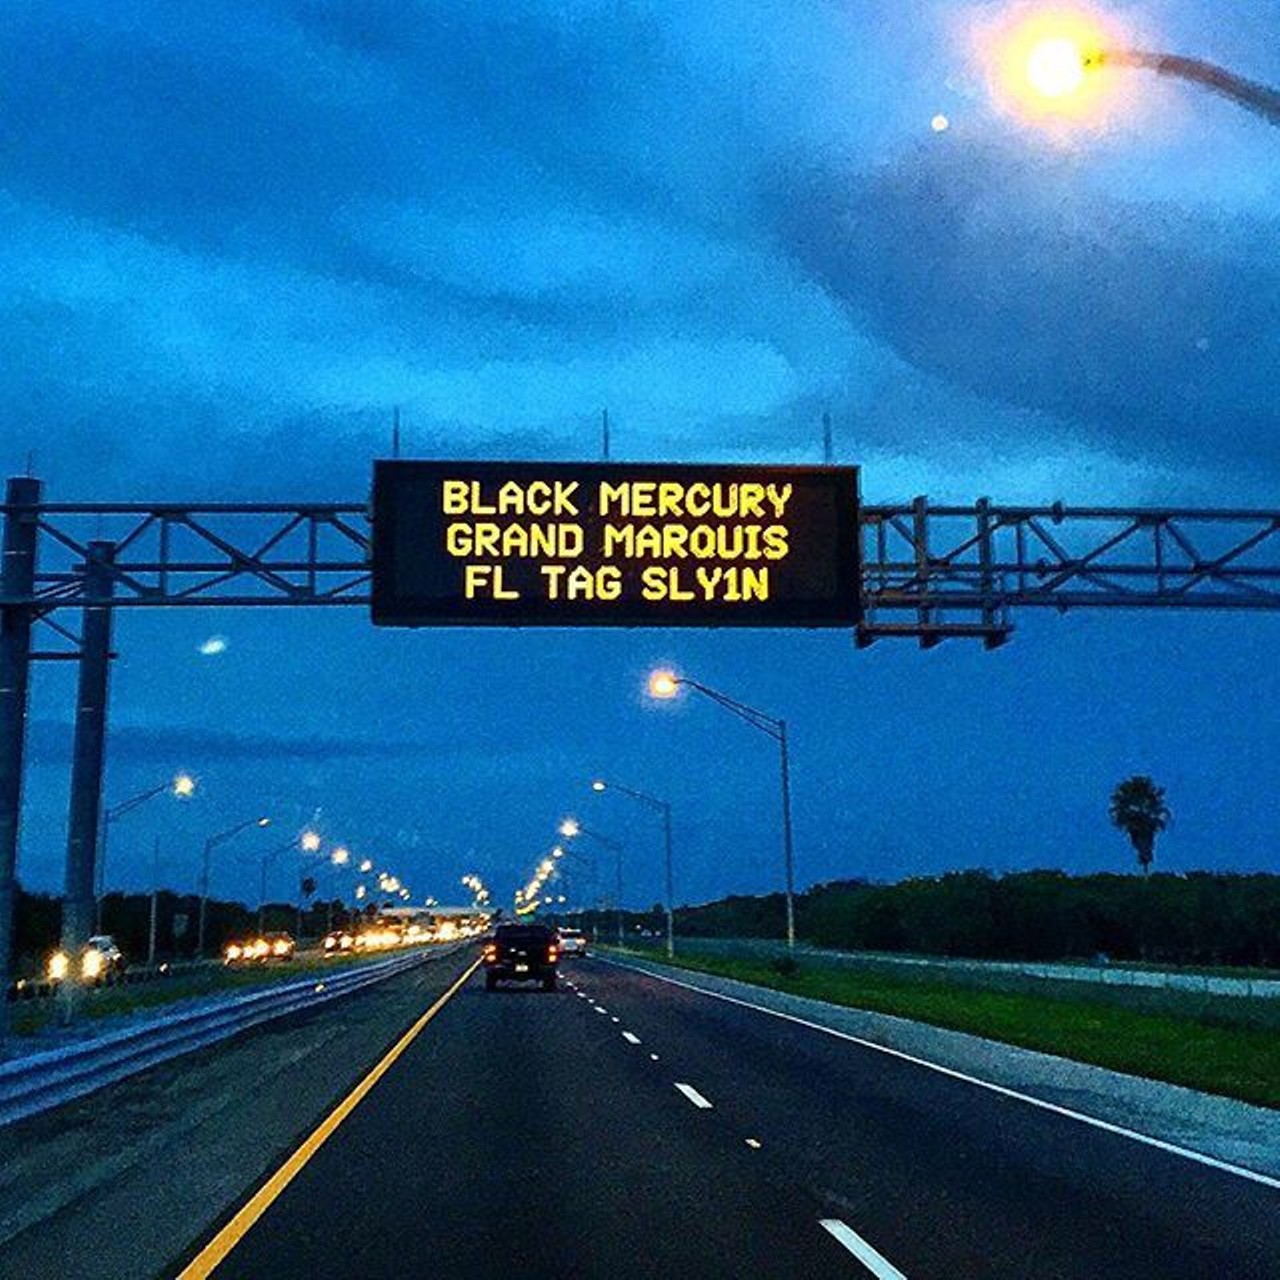 Silver alert signs that are longer than your commute
Even if it isn&#146;t old people holding drivers up, having to read those long alerts on the signs do.
Photo via baconhulk on Instagram